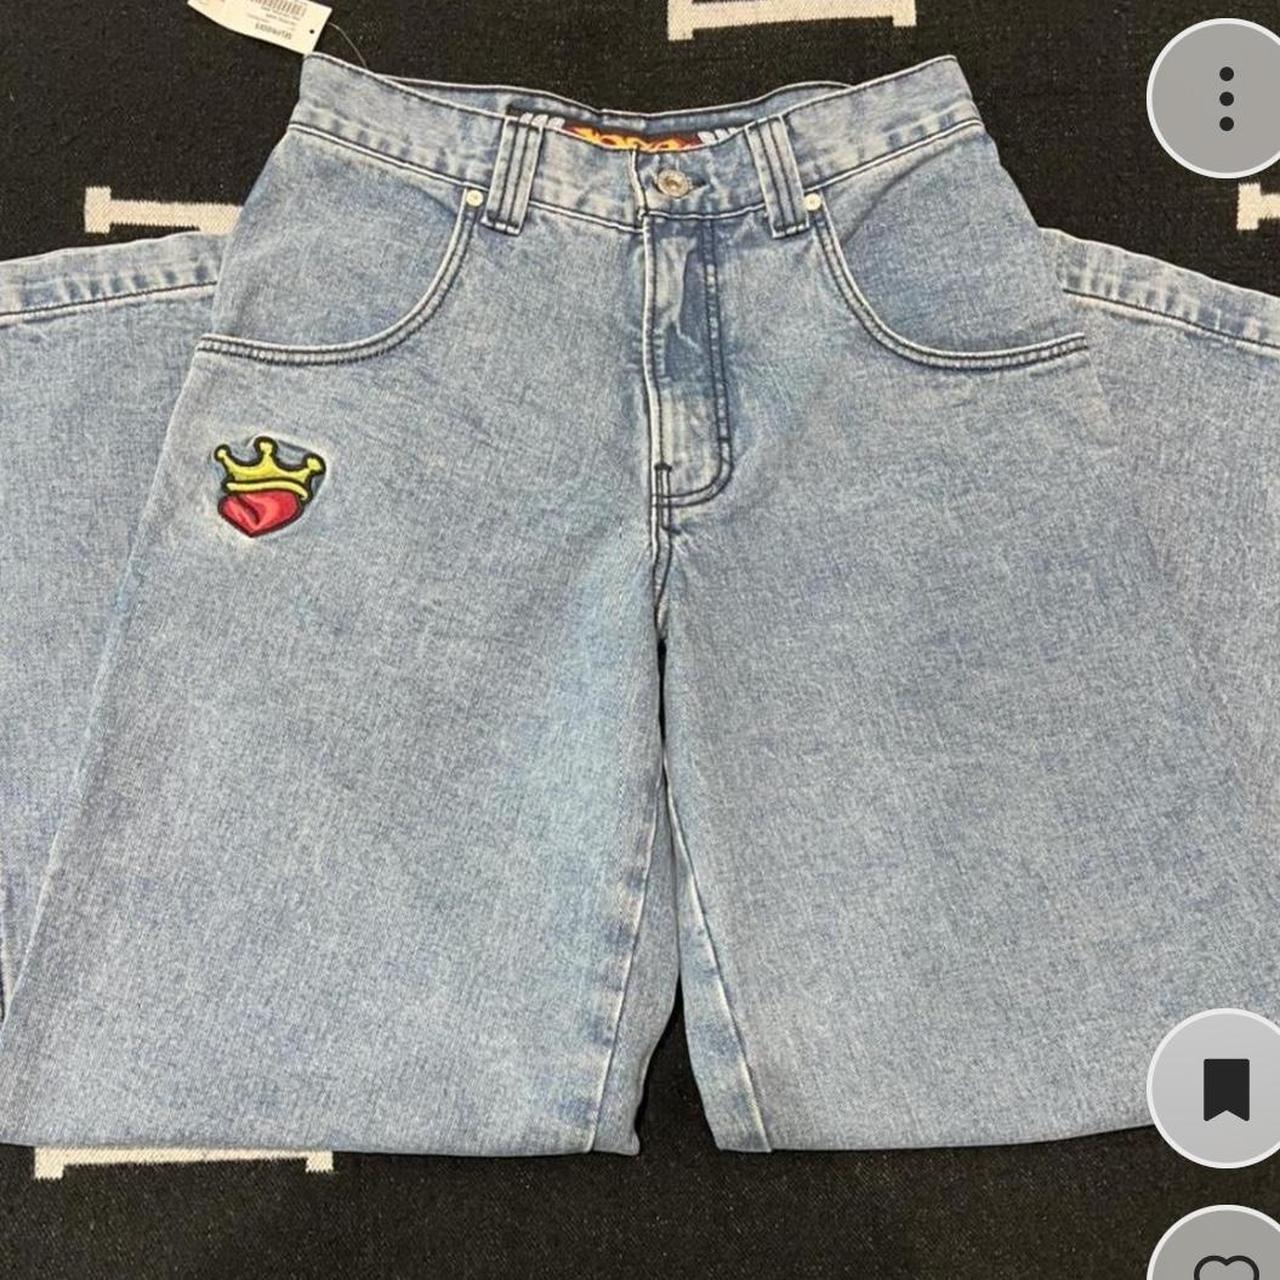 JNCO 179 PIPES baggy jeans size 30 waist like new - Depop